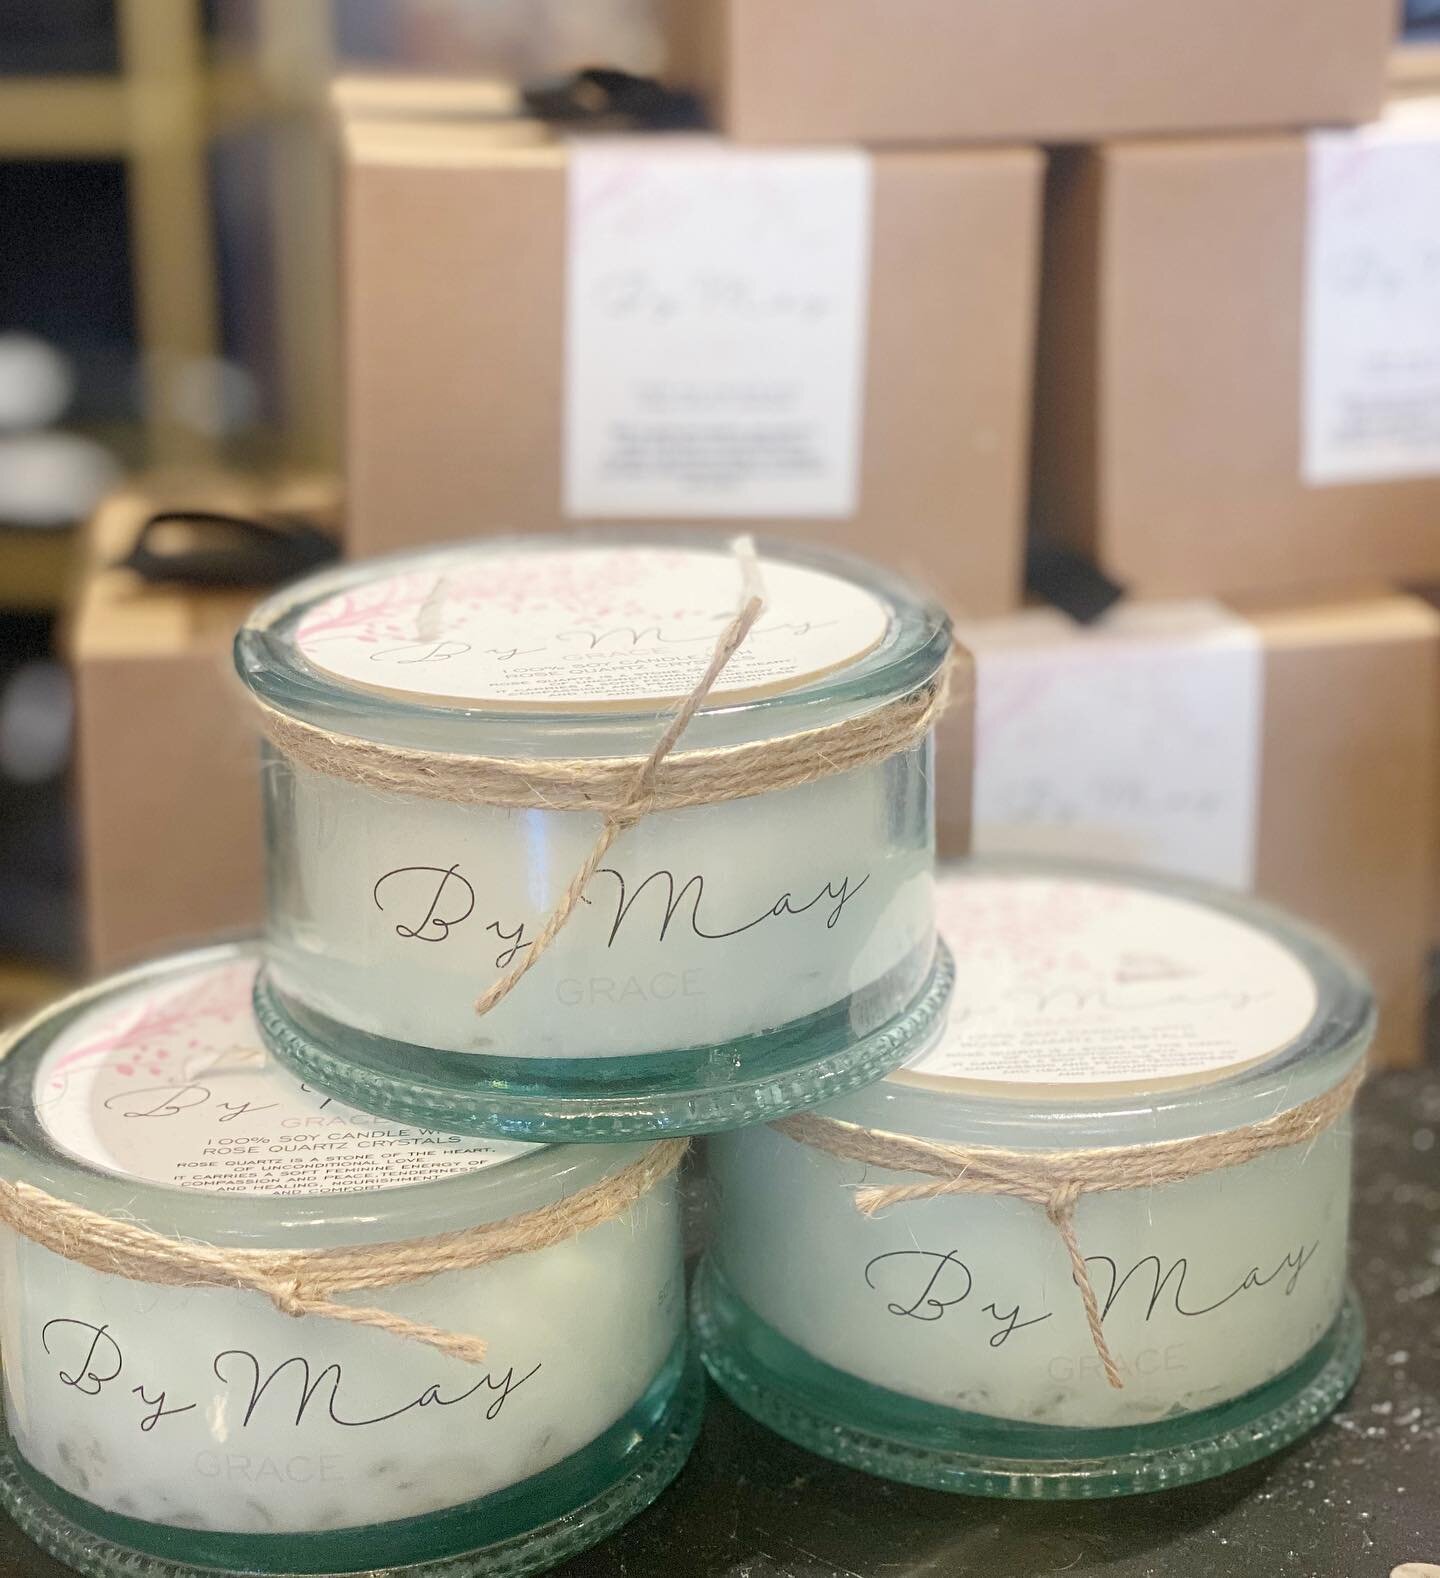 Our signature candles are back just in time for give giving season! We have added a new twist &mdash; each candle is made from soy wax with a 100% cotton wick. They contain a handful of #rosequartz chips to infuse the wax with a subtle vibration of #